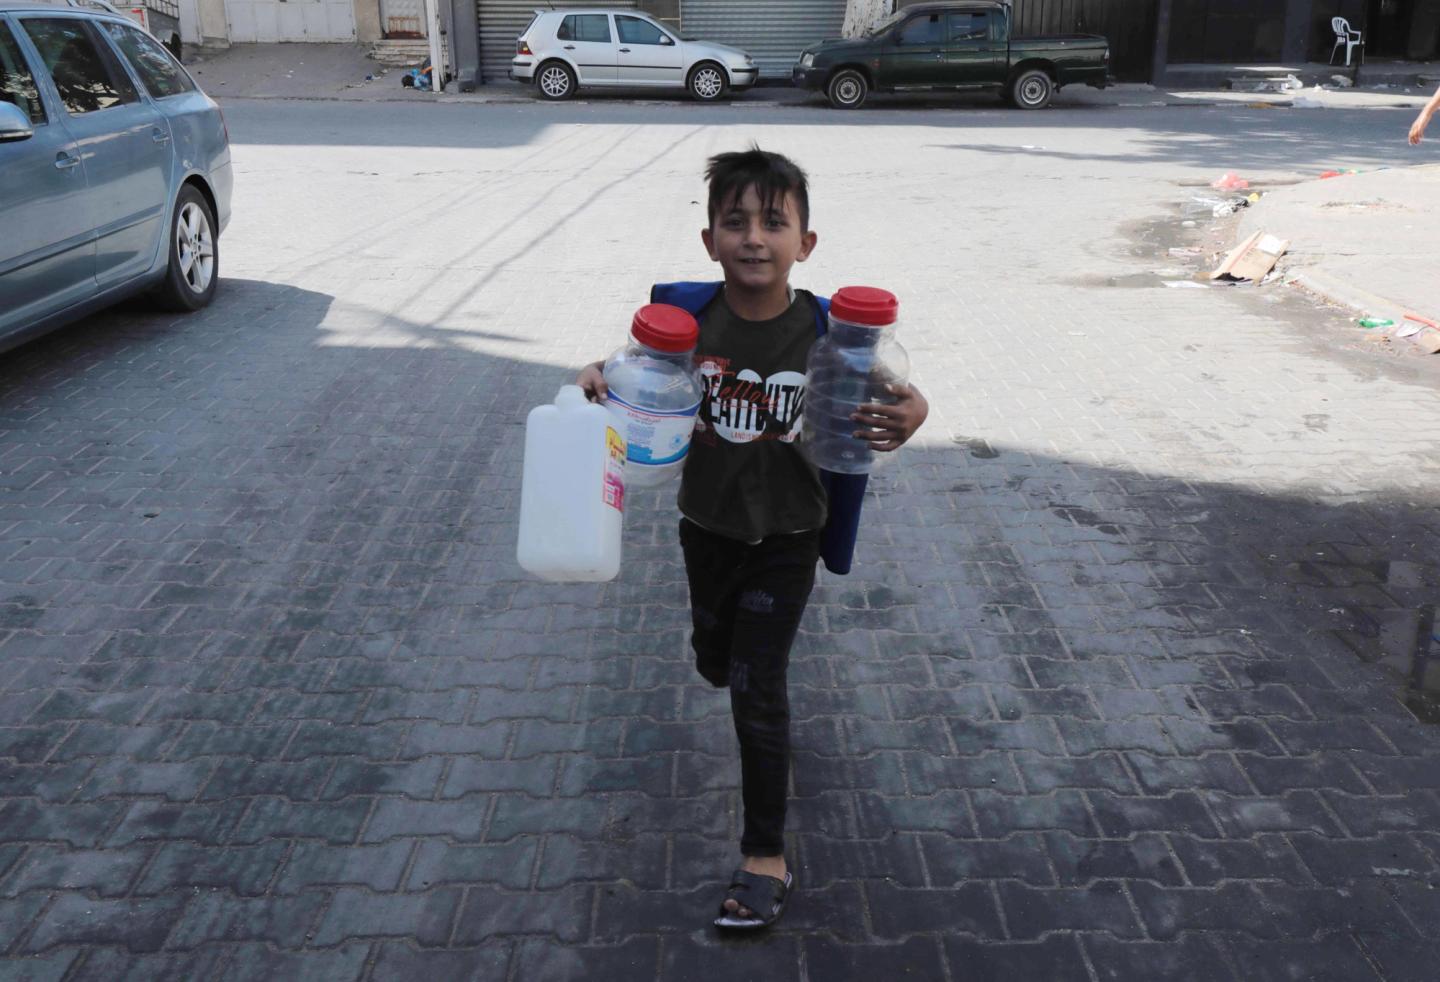 Help provide children in Gaza with emergency water and sanitation facilities.